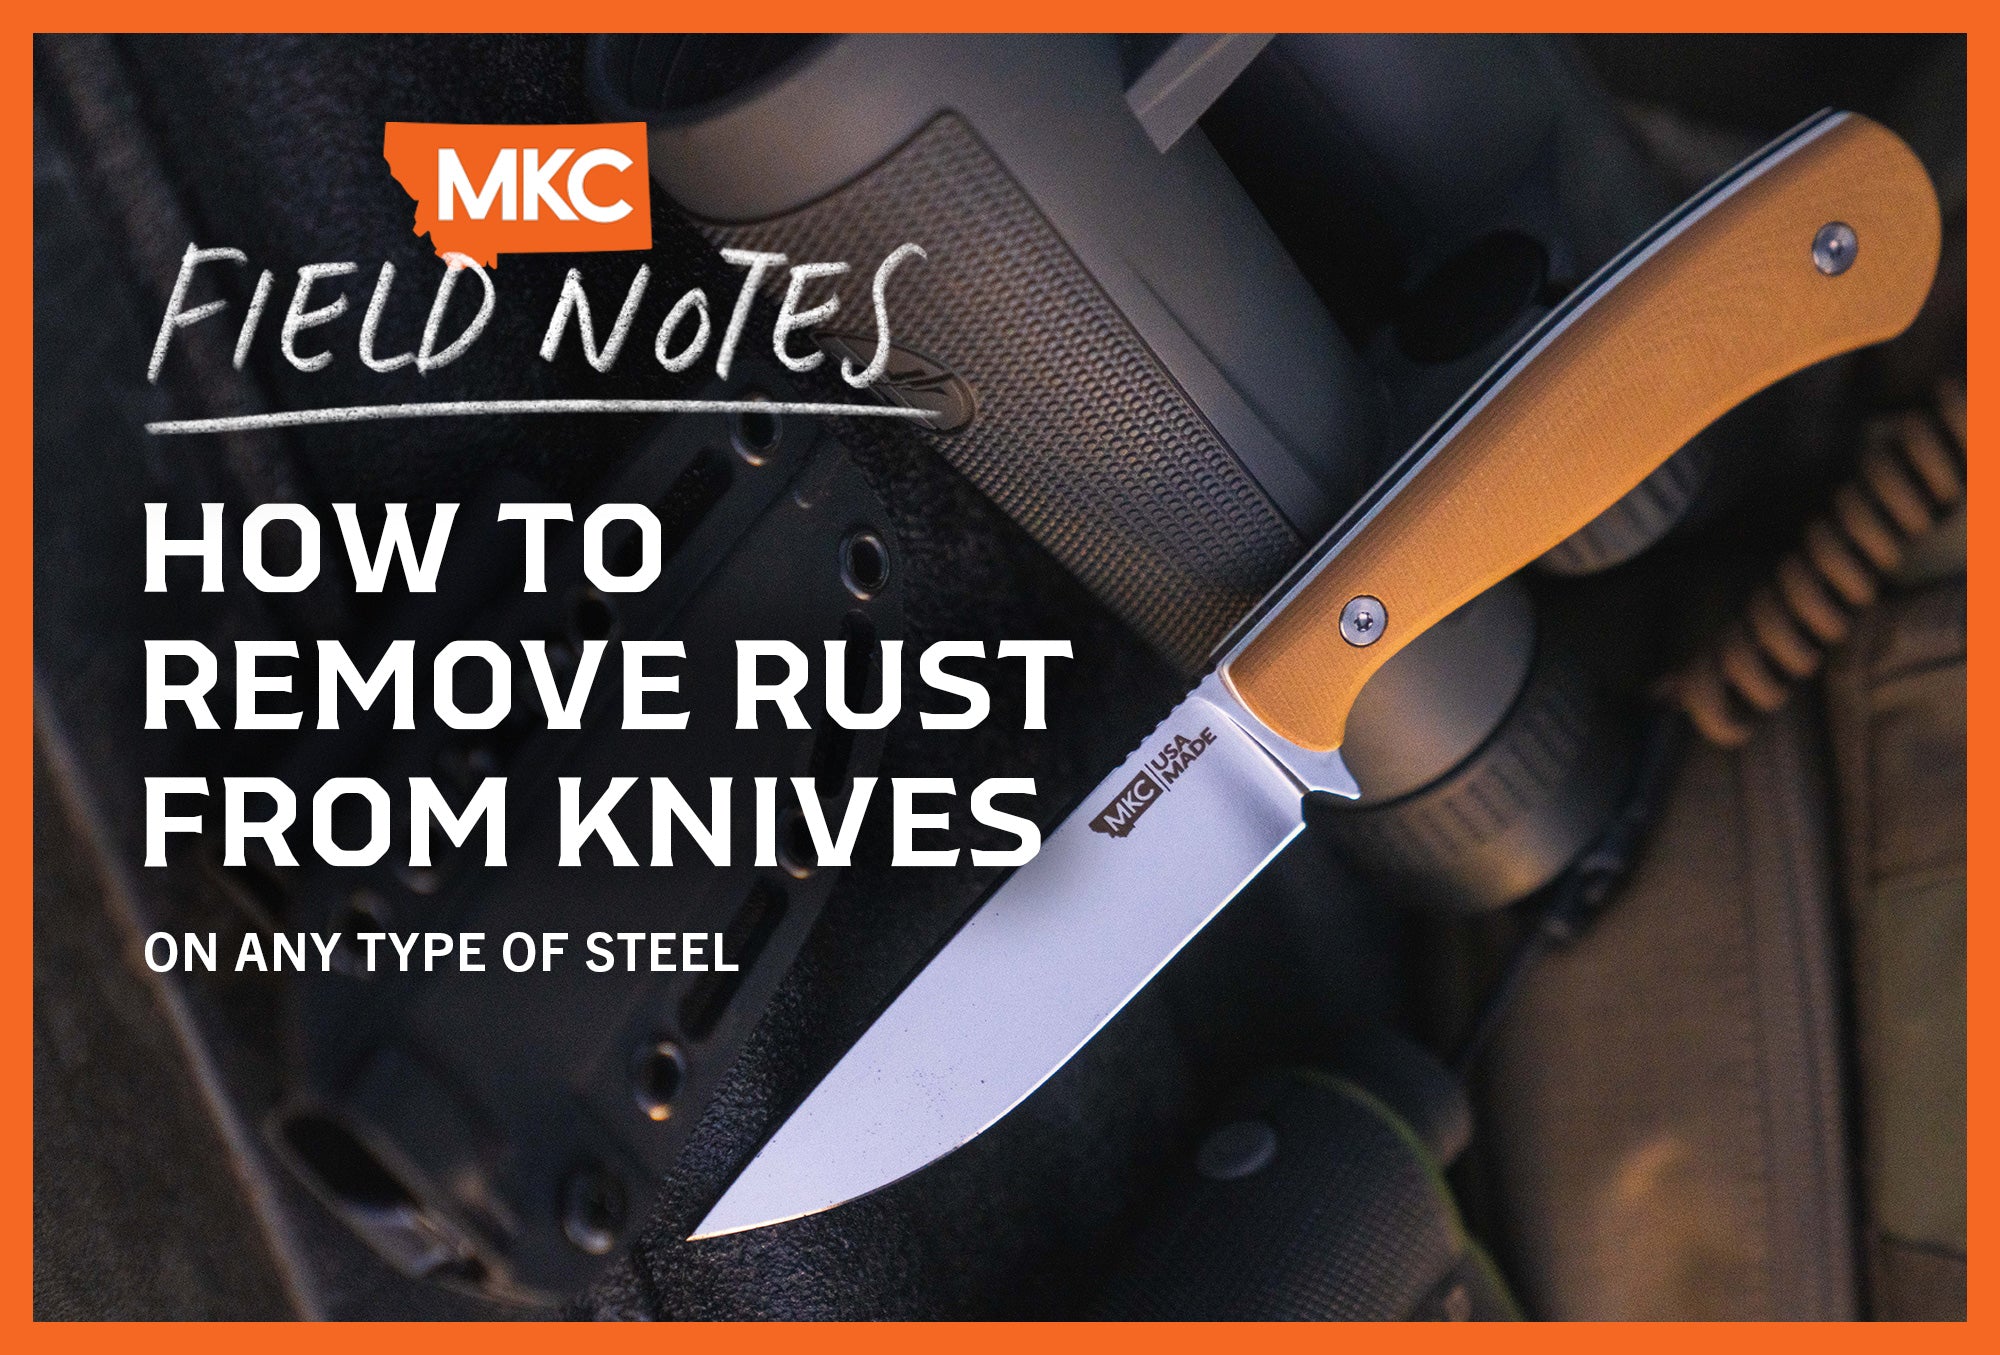 A pristine MKC knife lies across black hunting gear, representing a discussion on how to remove rust from knives.